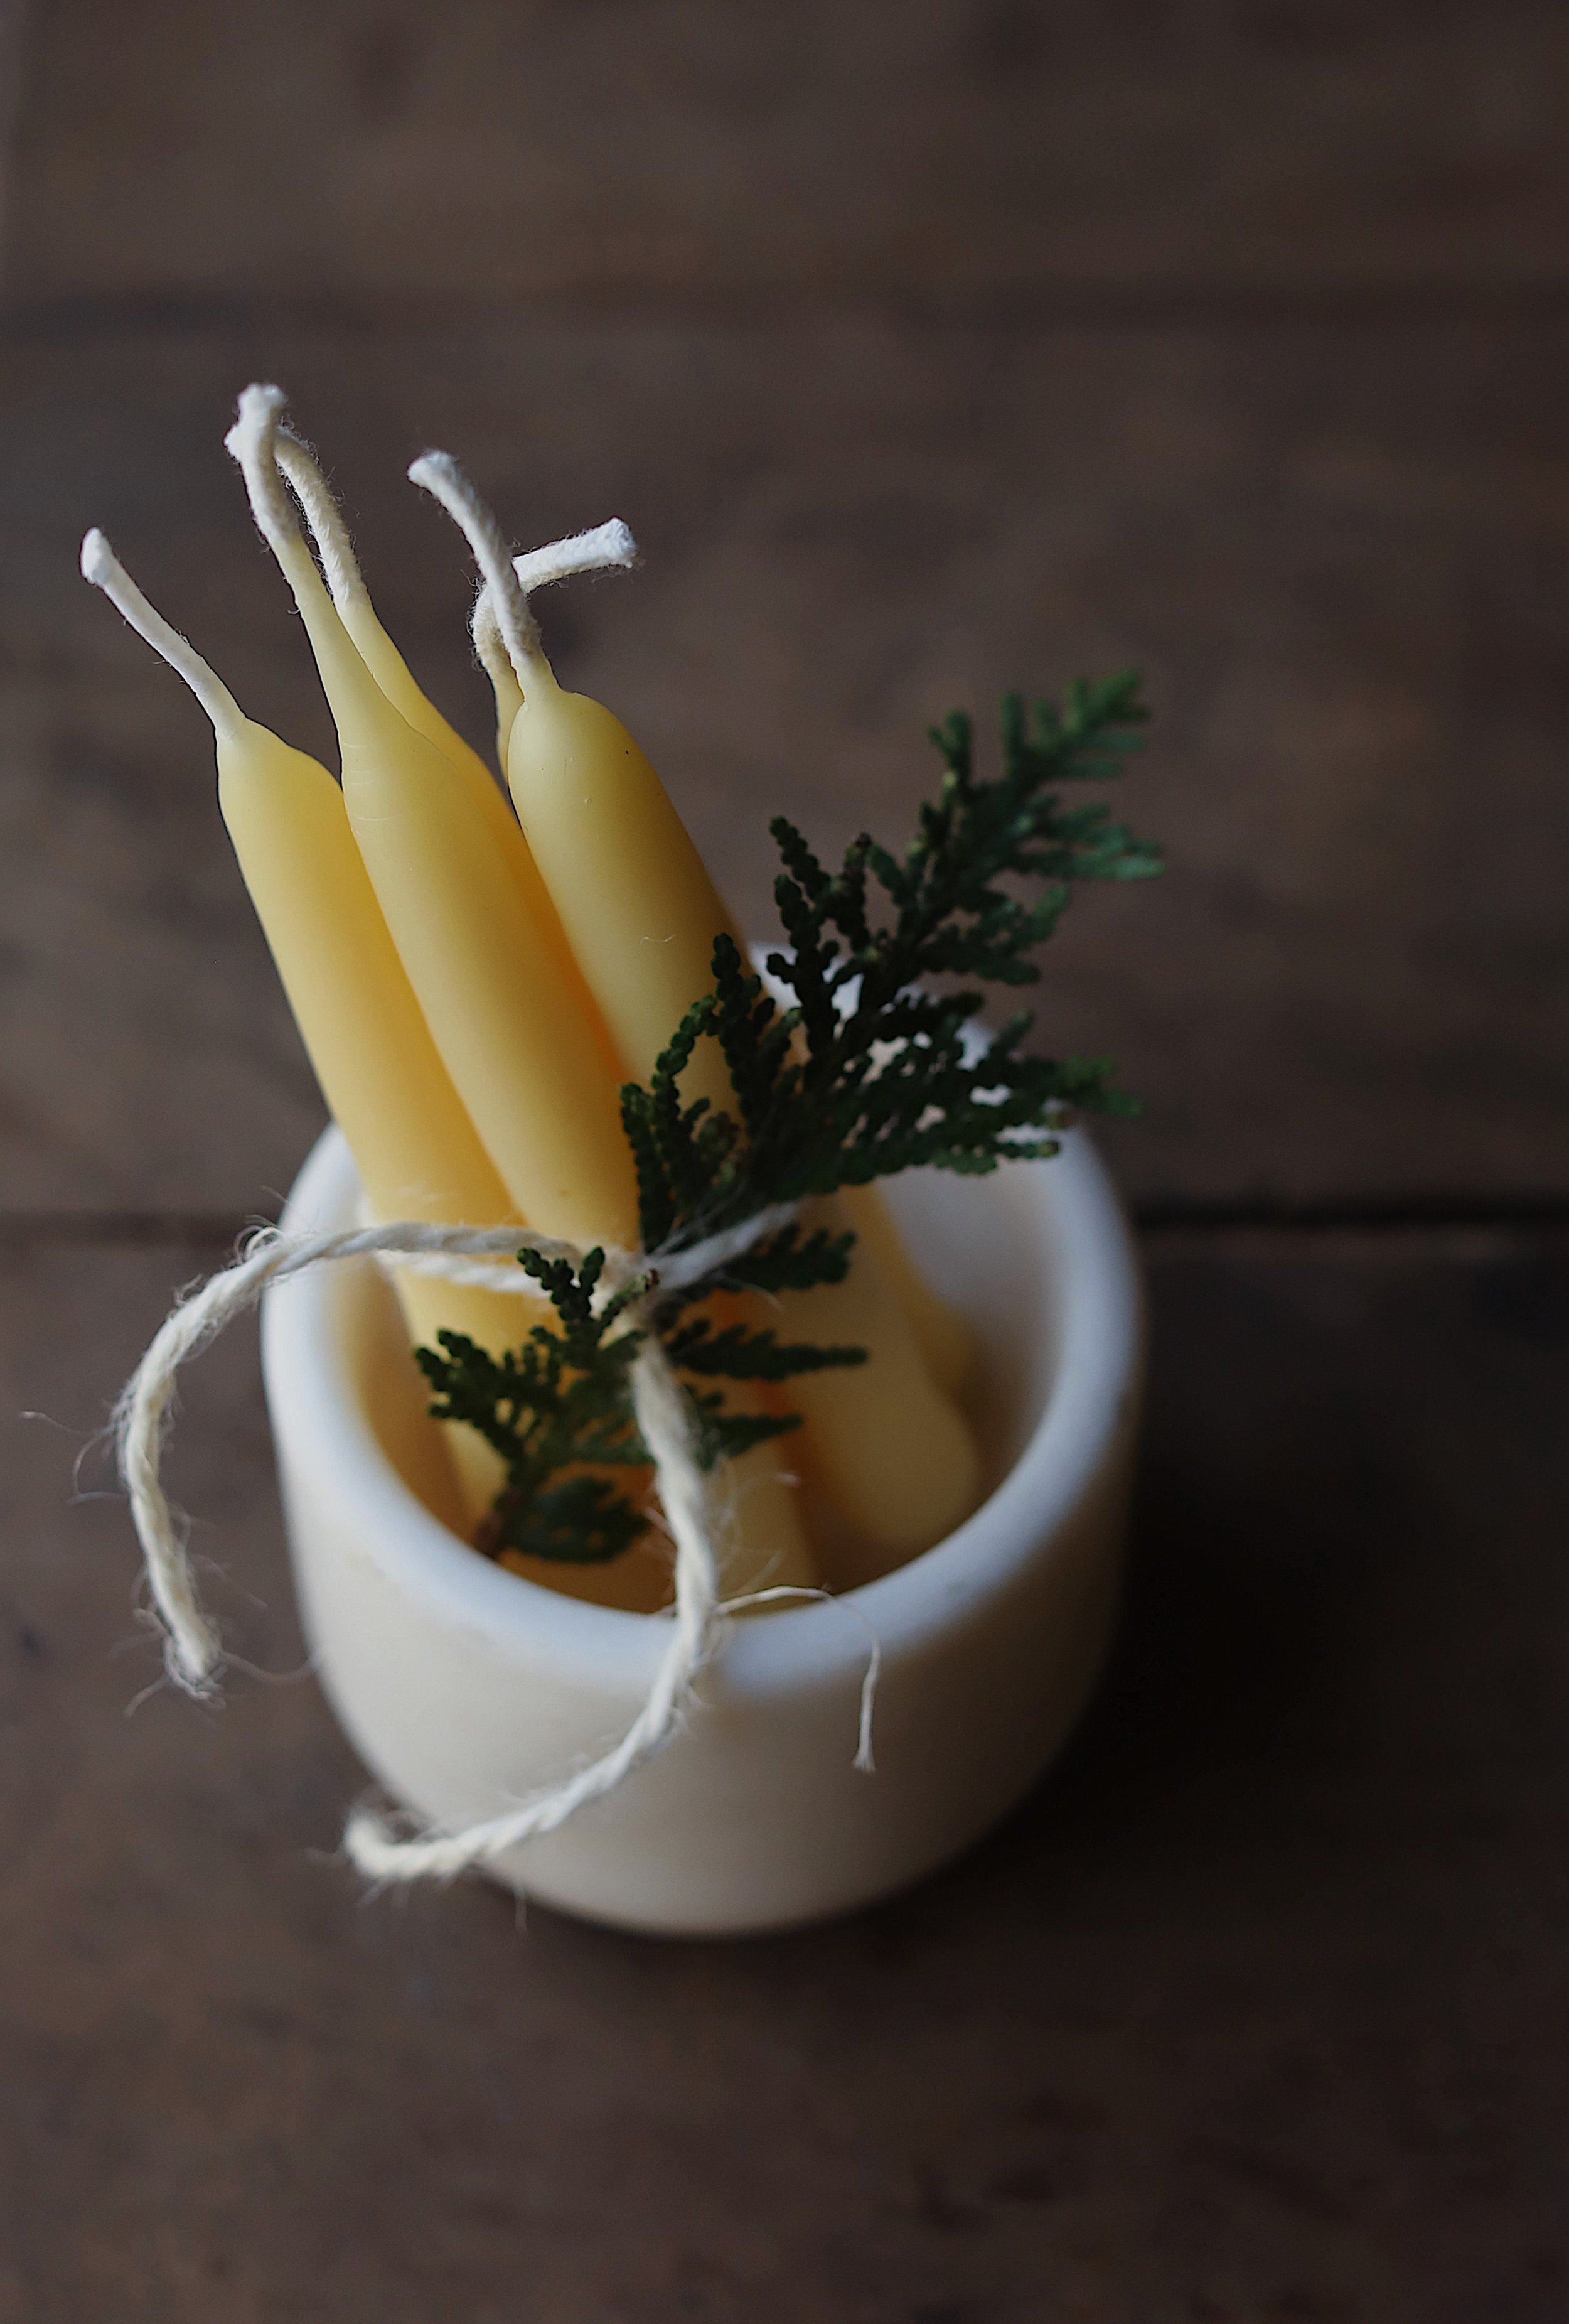 Do you want to make a natural beeswax candle? - Learn to create